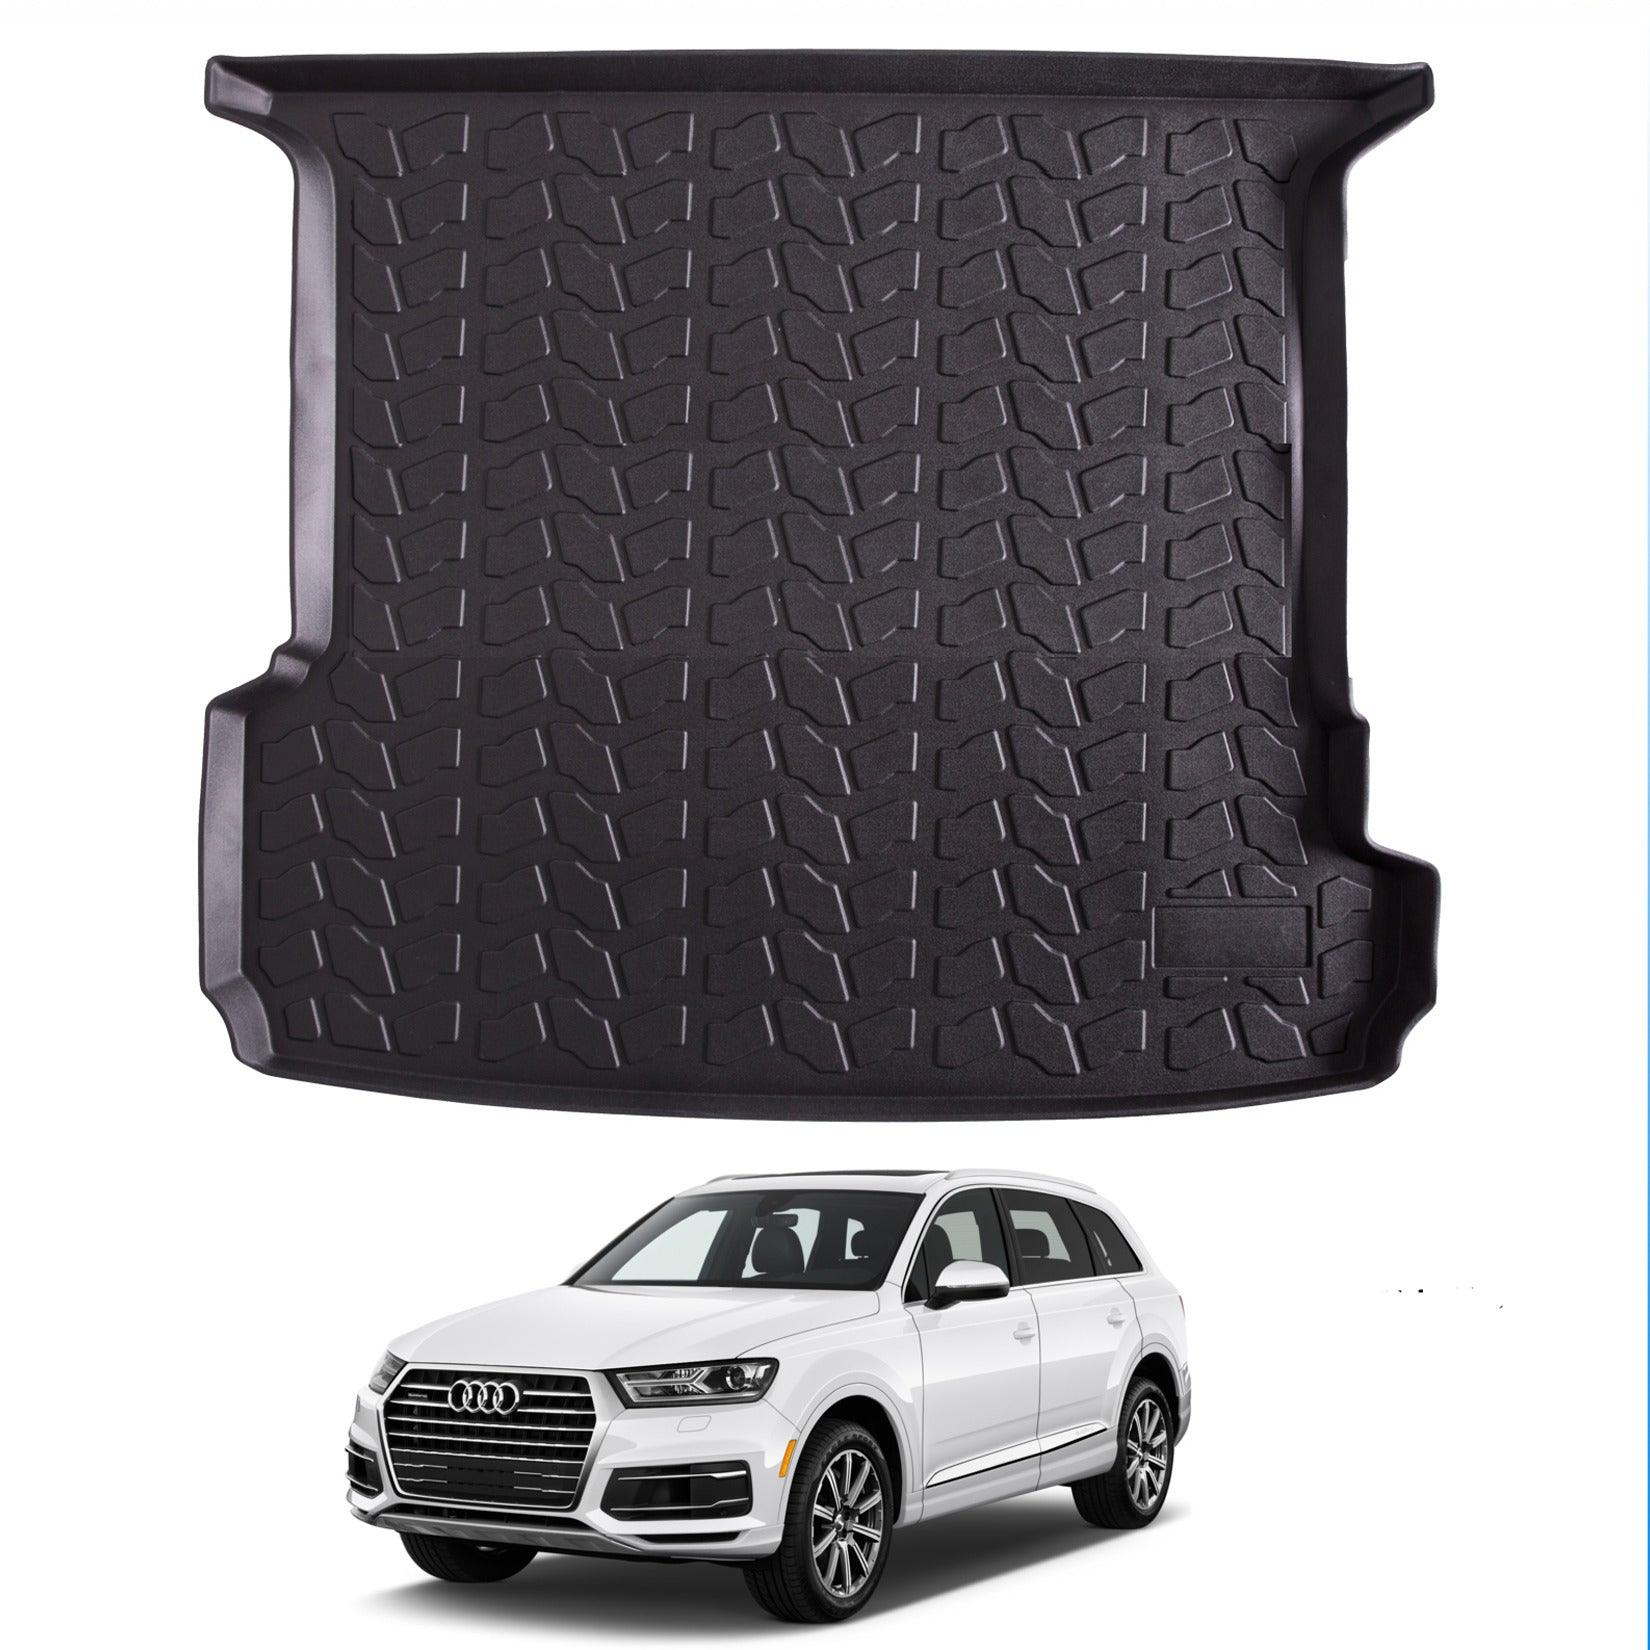 AUDI Q7 2016 ON - STX TAILORED RUBBER BOOT LINER MAT PROTECTOR - Storm Xccessories2